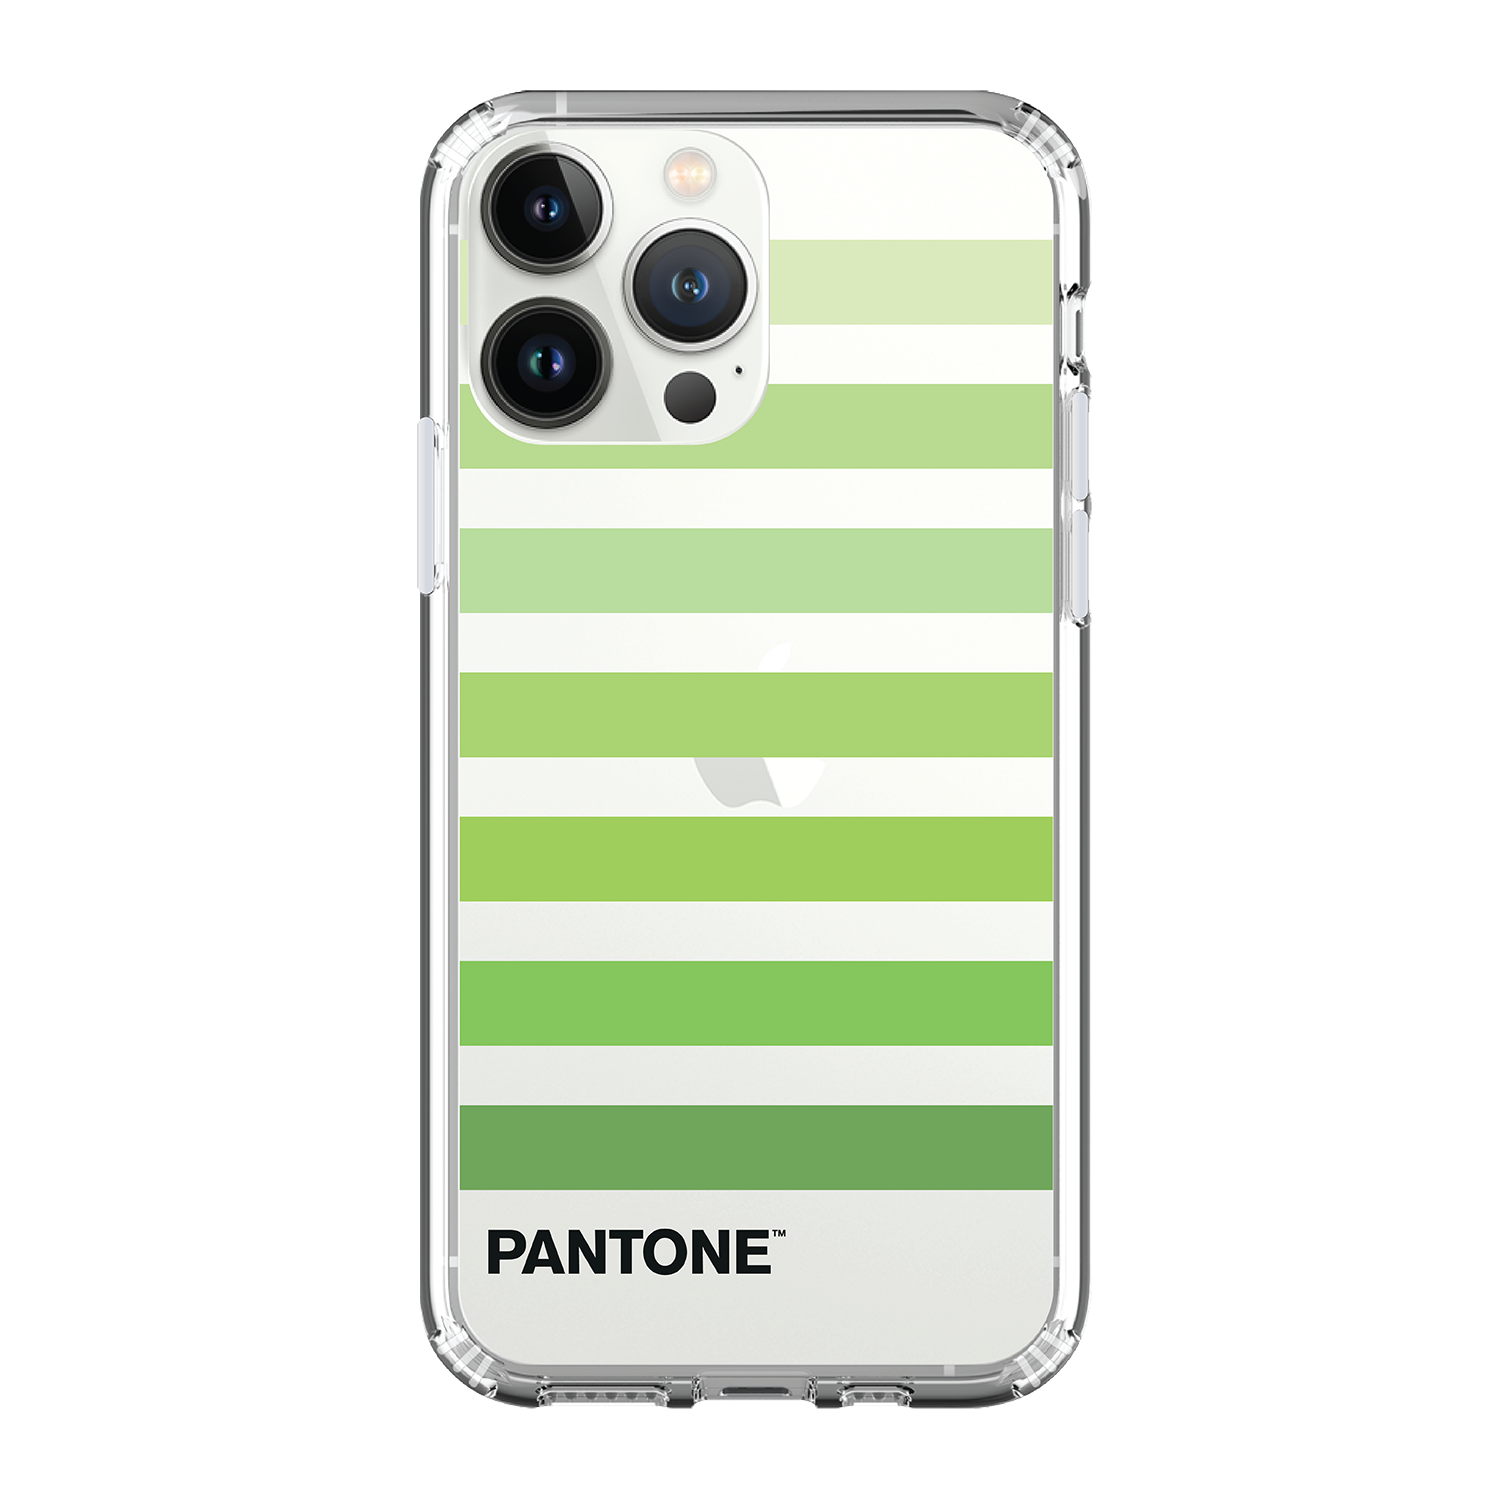 PANTONE Clear Case / iPhone Case / Android Case / Samsung Case 正版授權 全包邊氣囊防撞手機殼 (PE03)